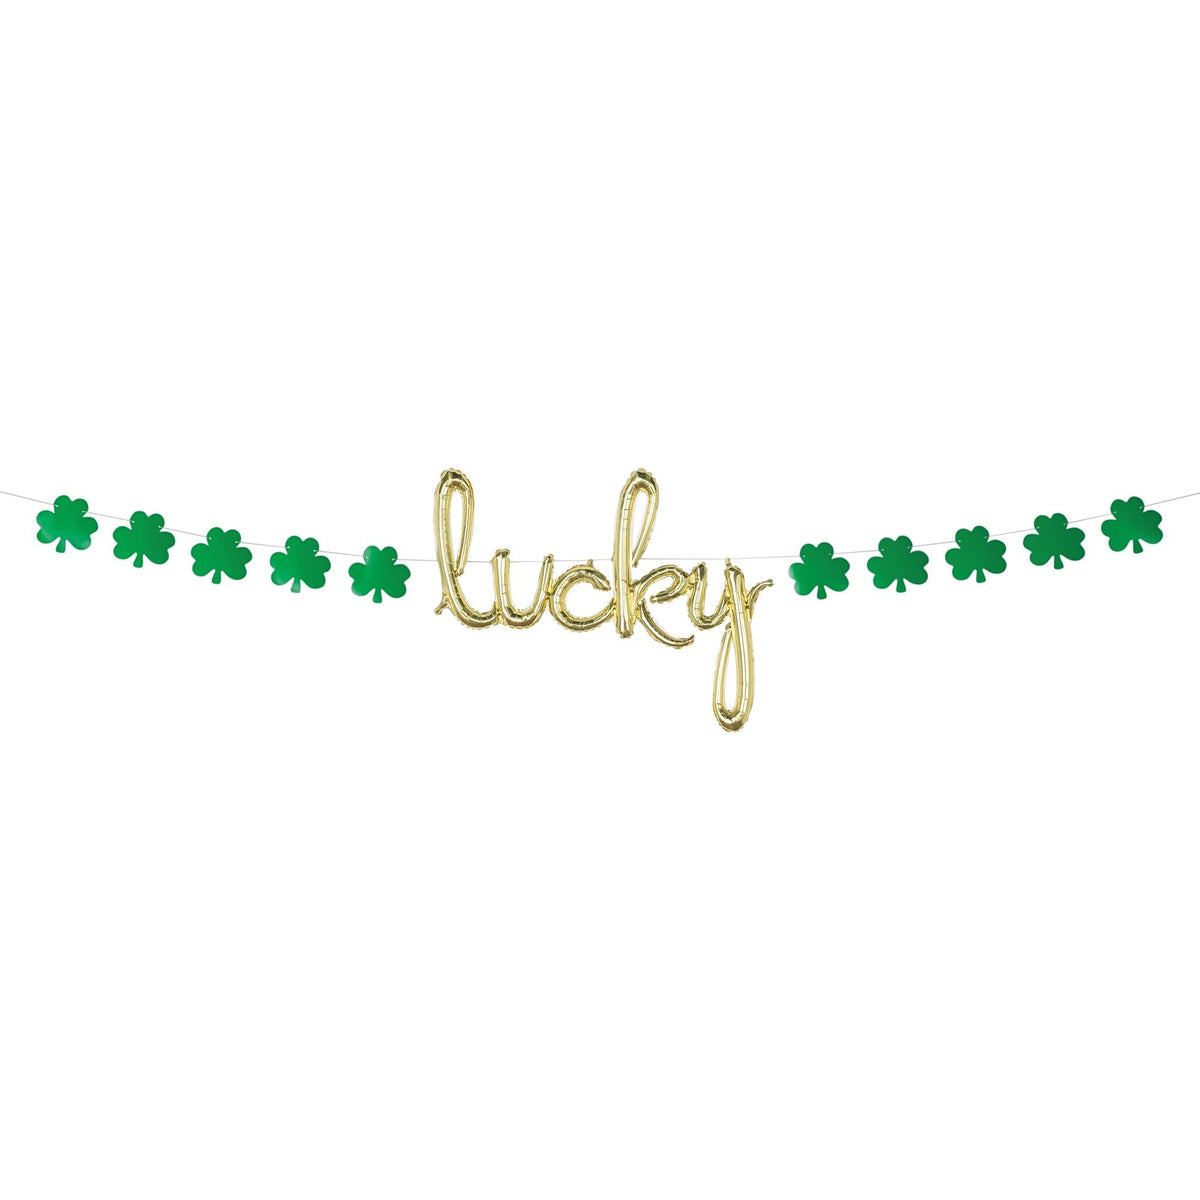 AMSCAN CA Valentine's Day St-Patrick's Day Balloon Lucky Banner Kit, 192 Inches, 1 Count